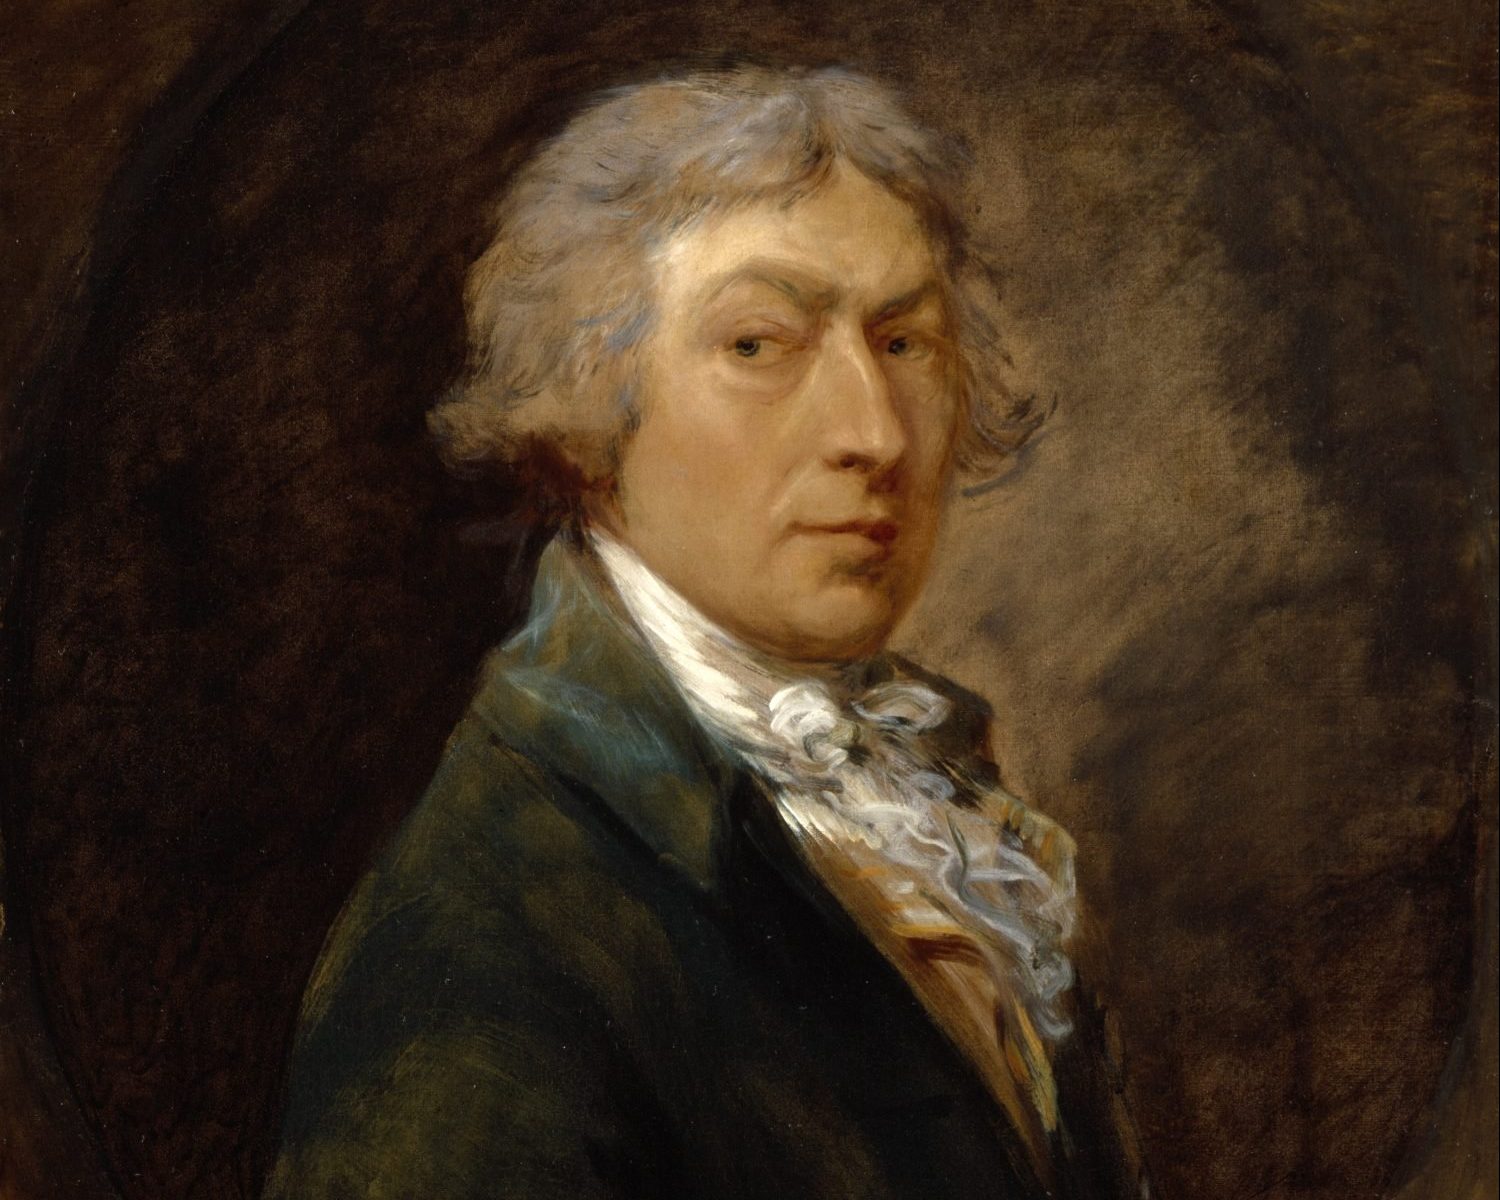 An image of the painting by Thomas Gainsborough, Self portrait c. 1787.